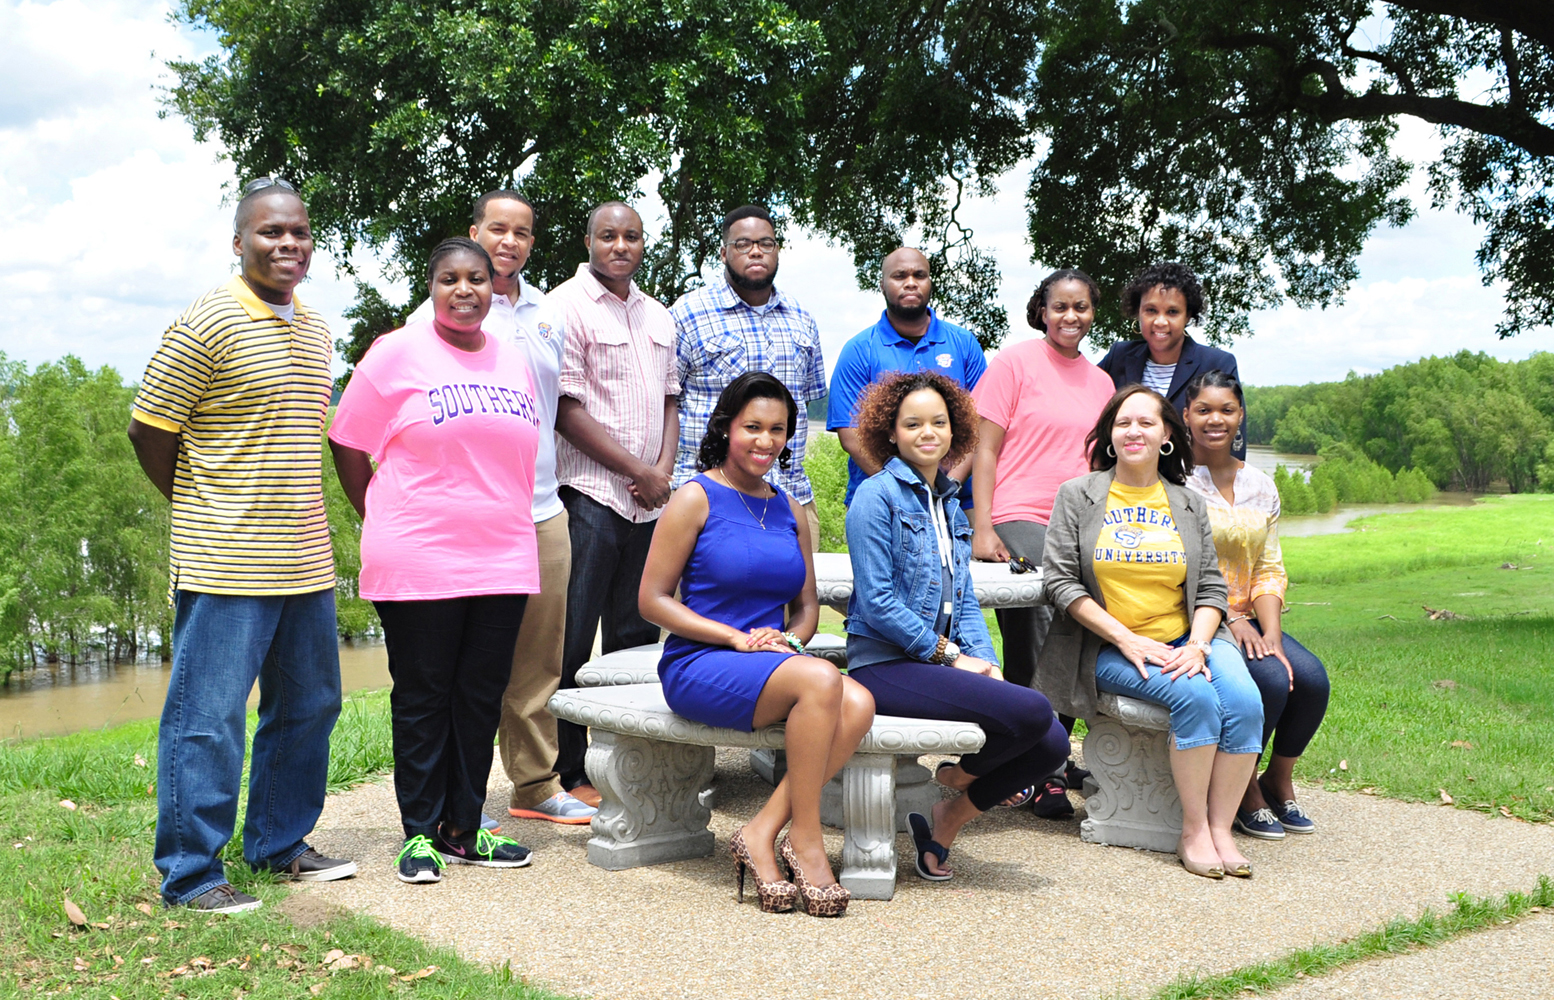 SU student, faculty, alumni group touring Europe | Southern University